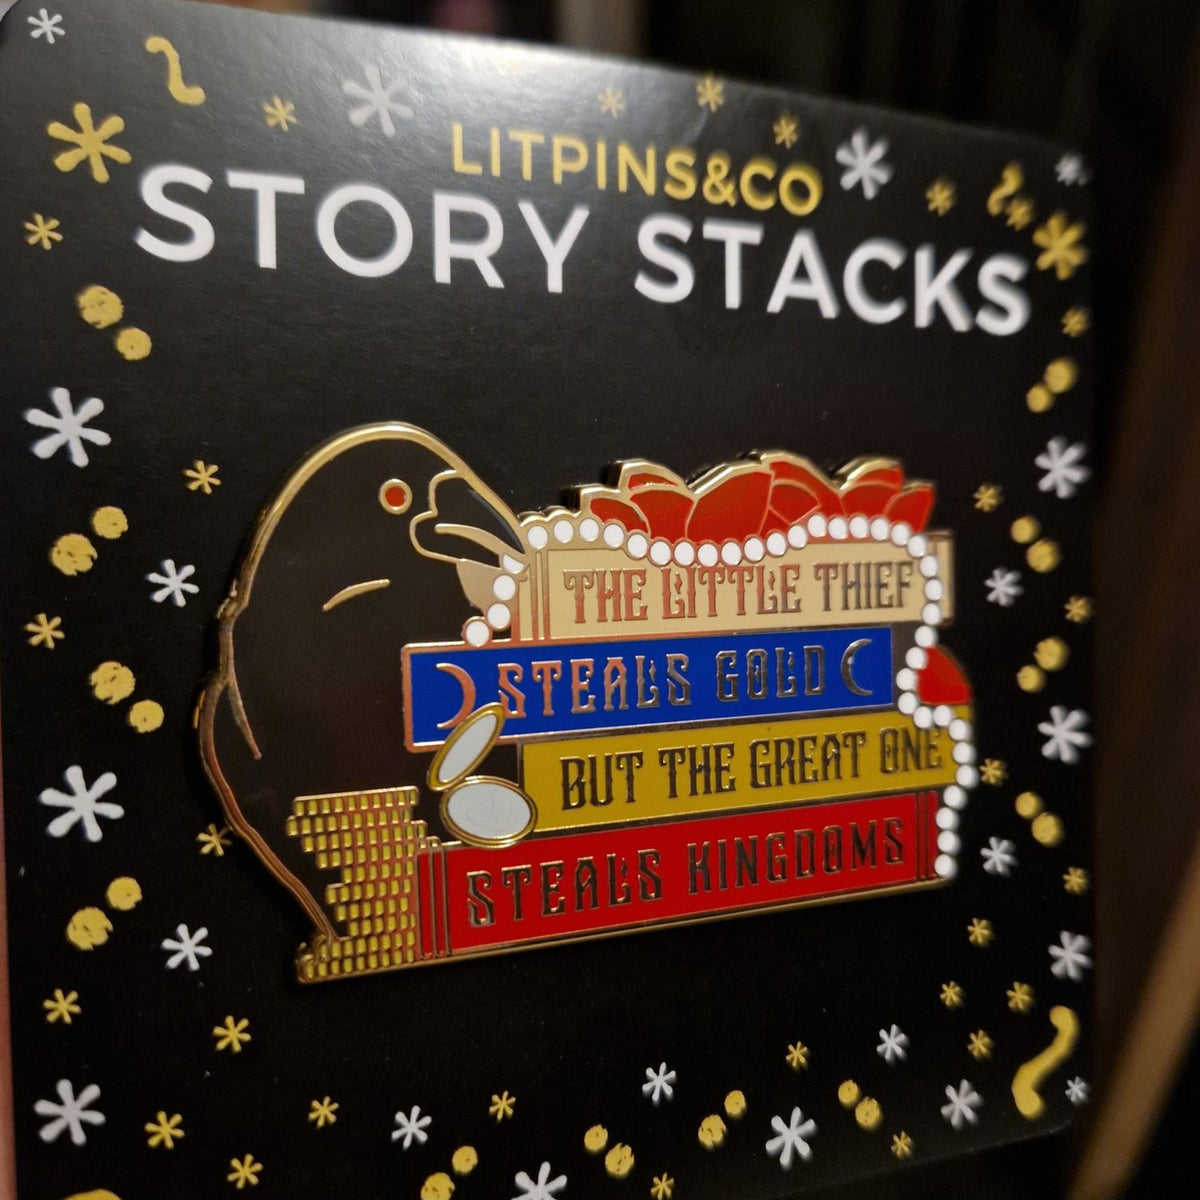 &quot;The Little Thief Steals Gold But The Great One Steals Kingdoms.&quot; Enamel pin inspired by Marget Owen on a LitPins&amp;Co Story Stack backing card.